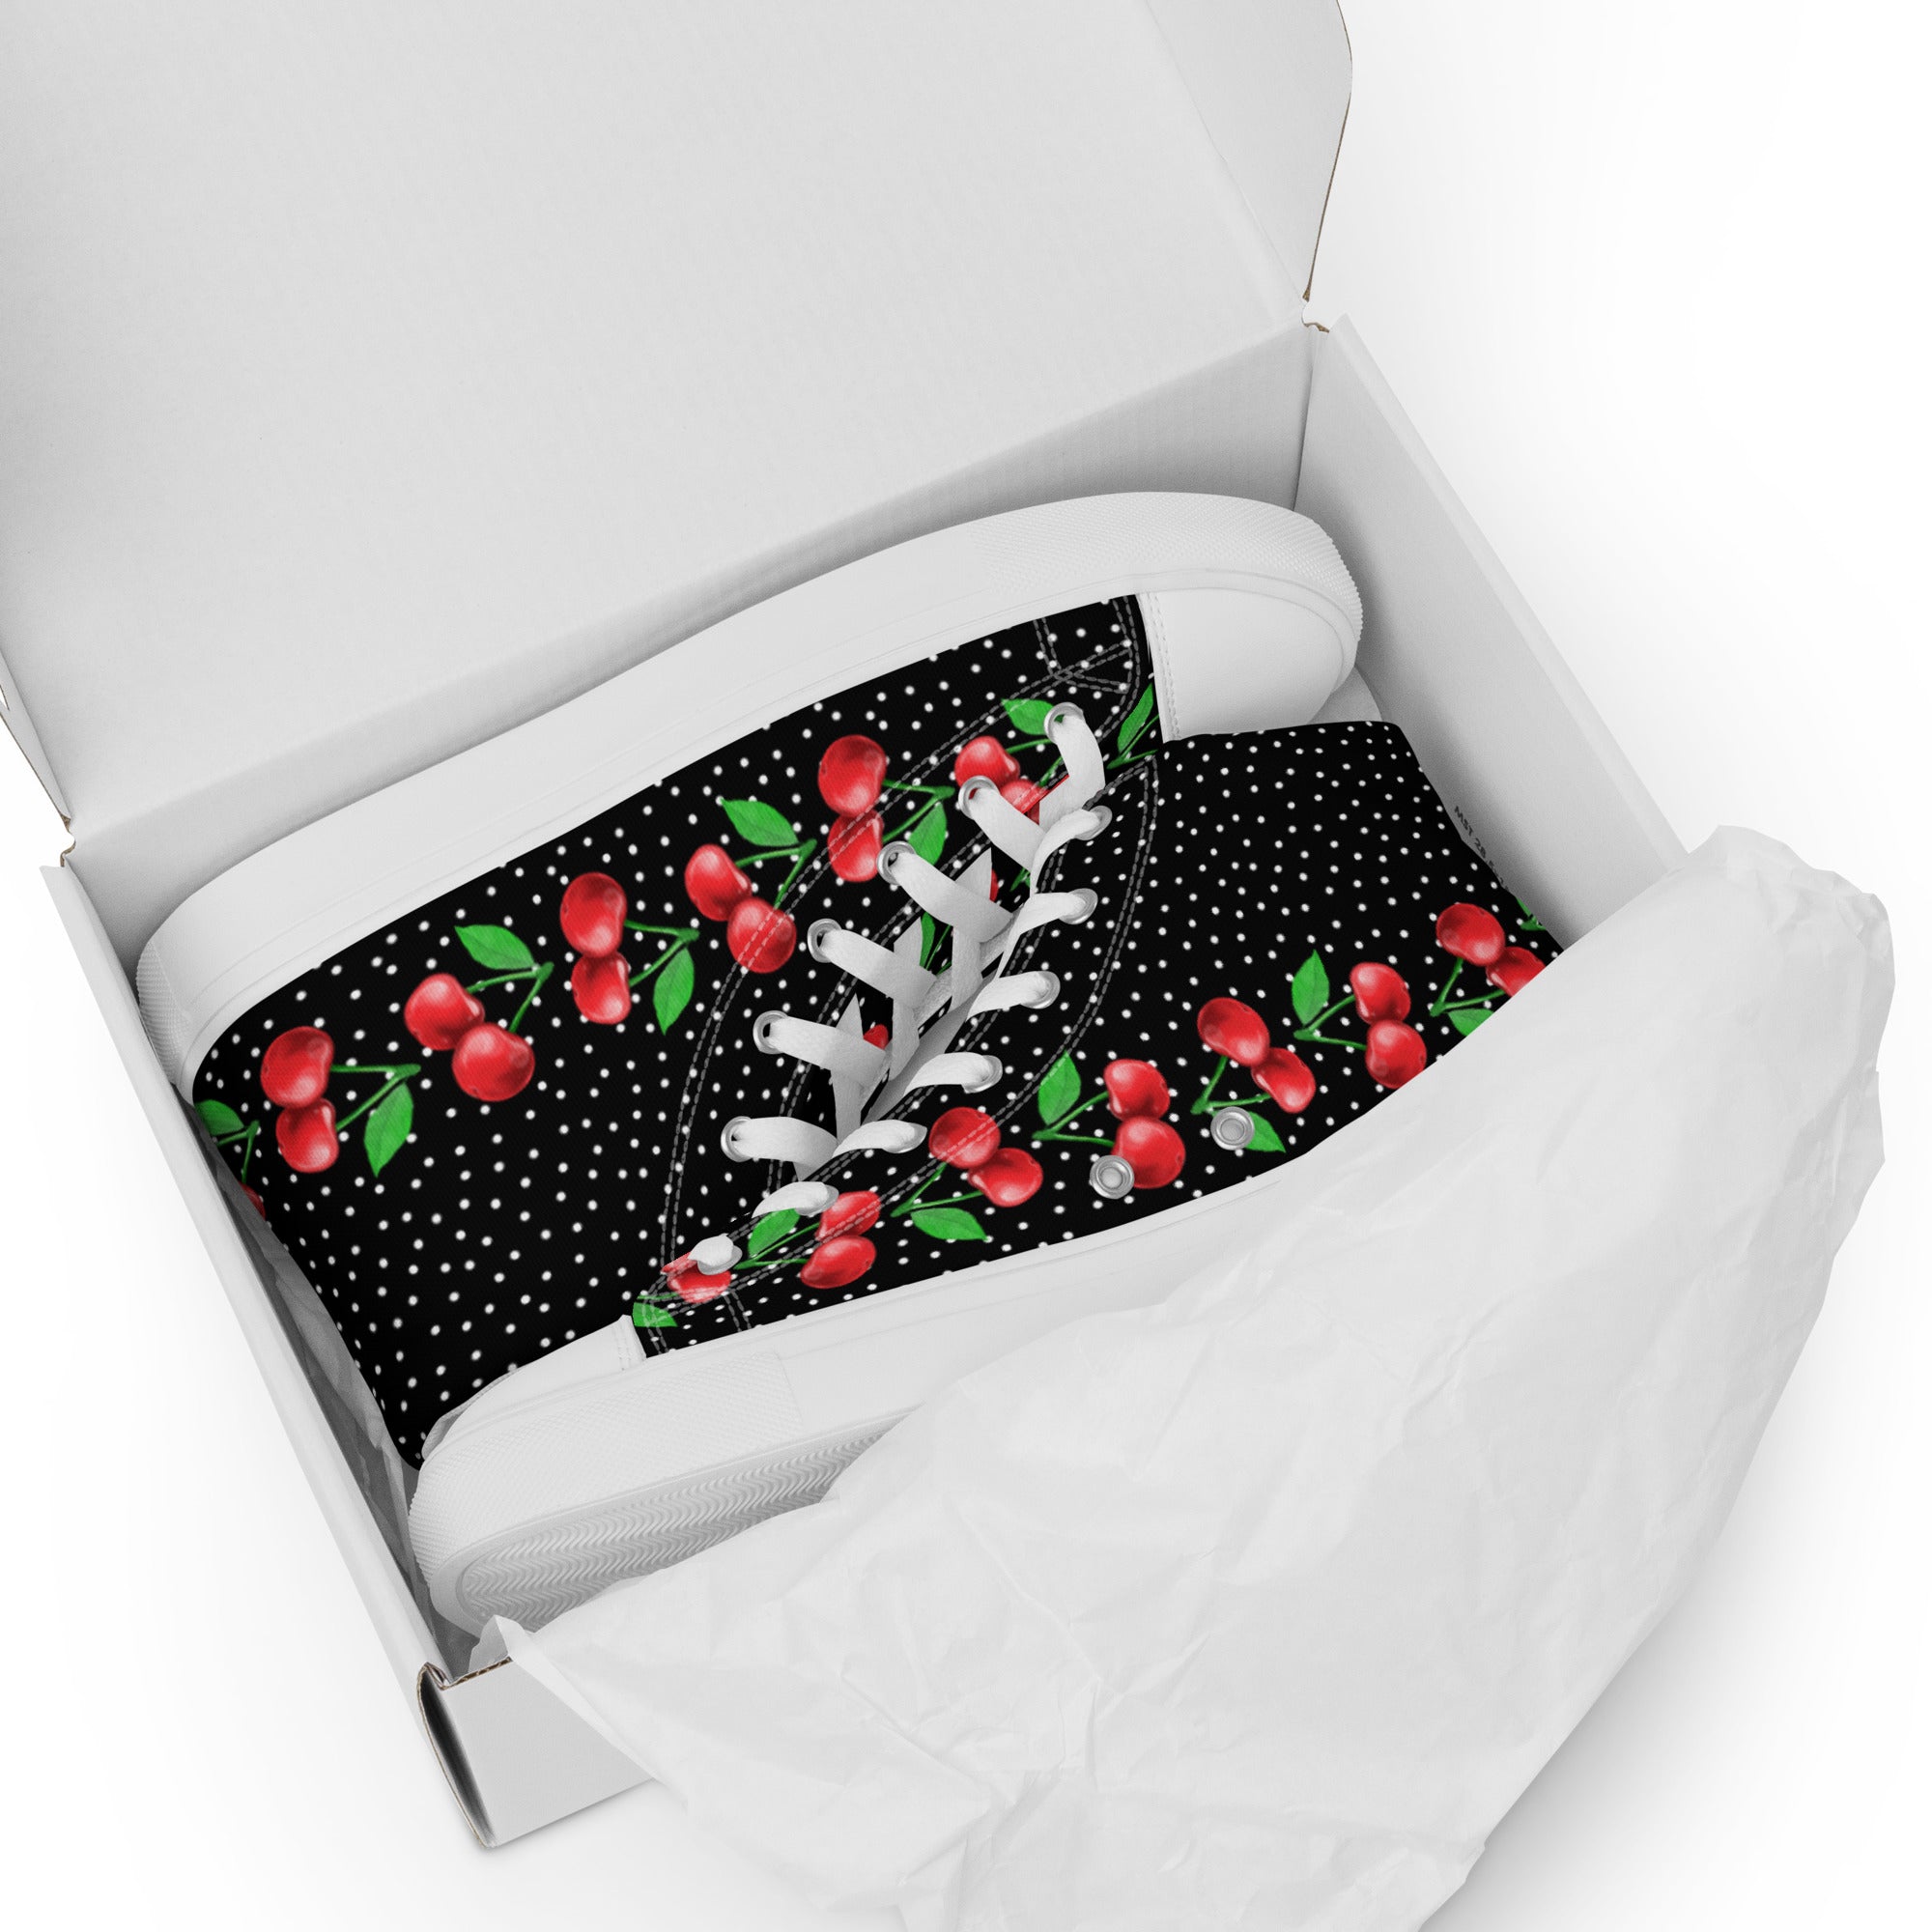 Cherries And Polka Dots Women’s High Tops Shoes